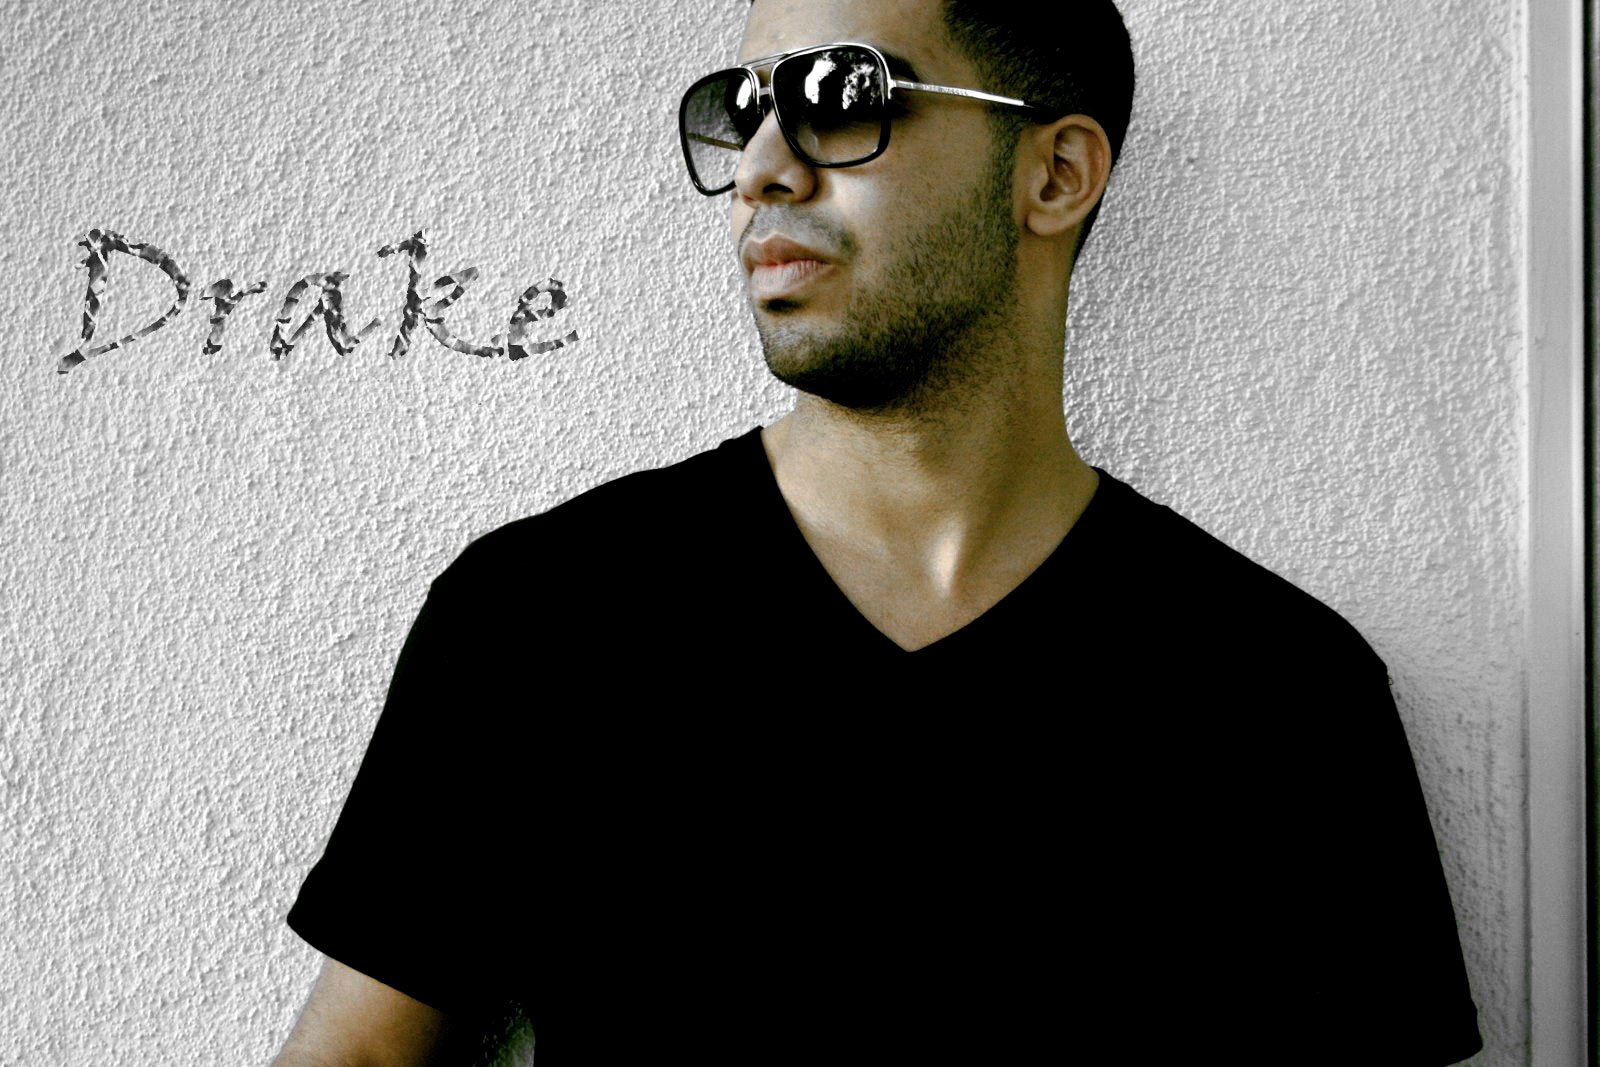 Drake Wallpaper Gallery Yopriceville   High Quality